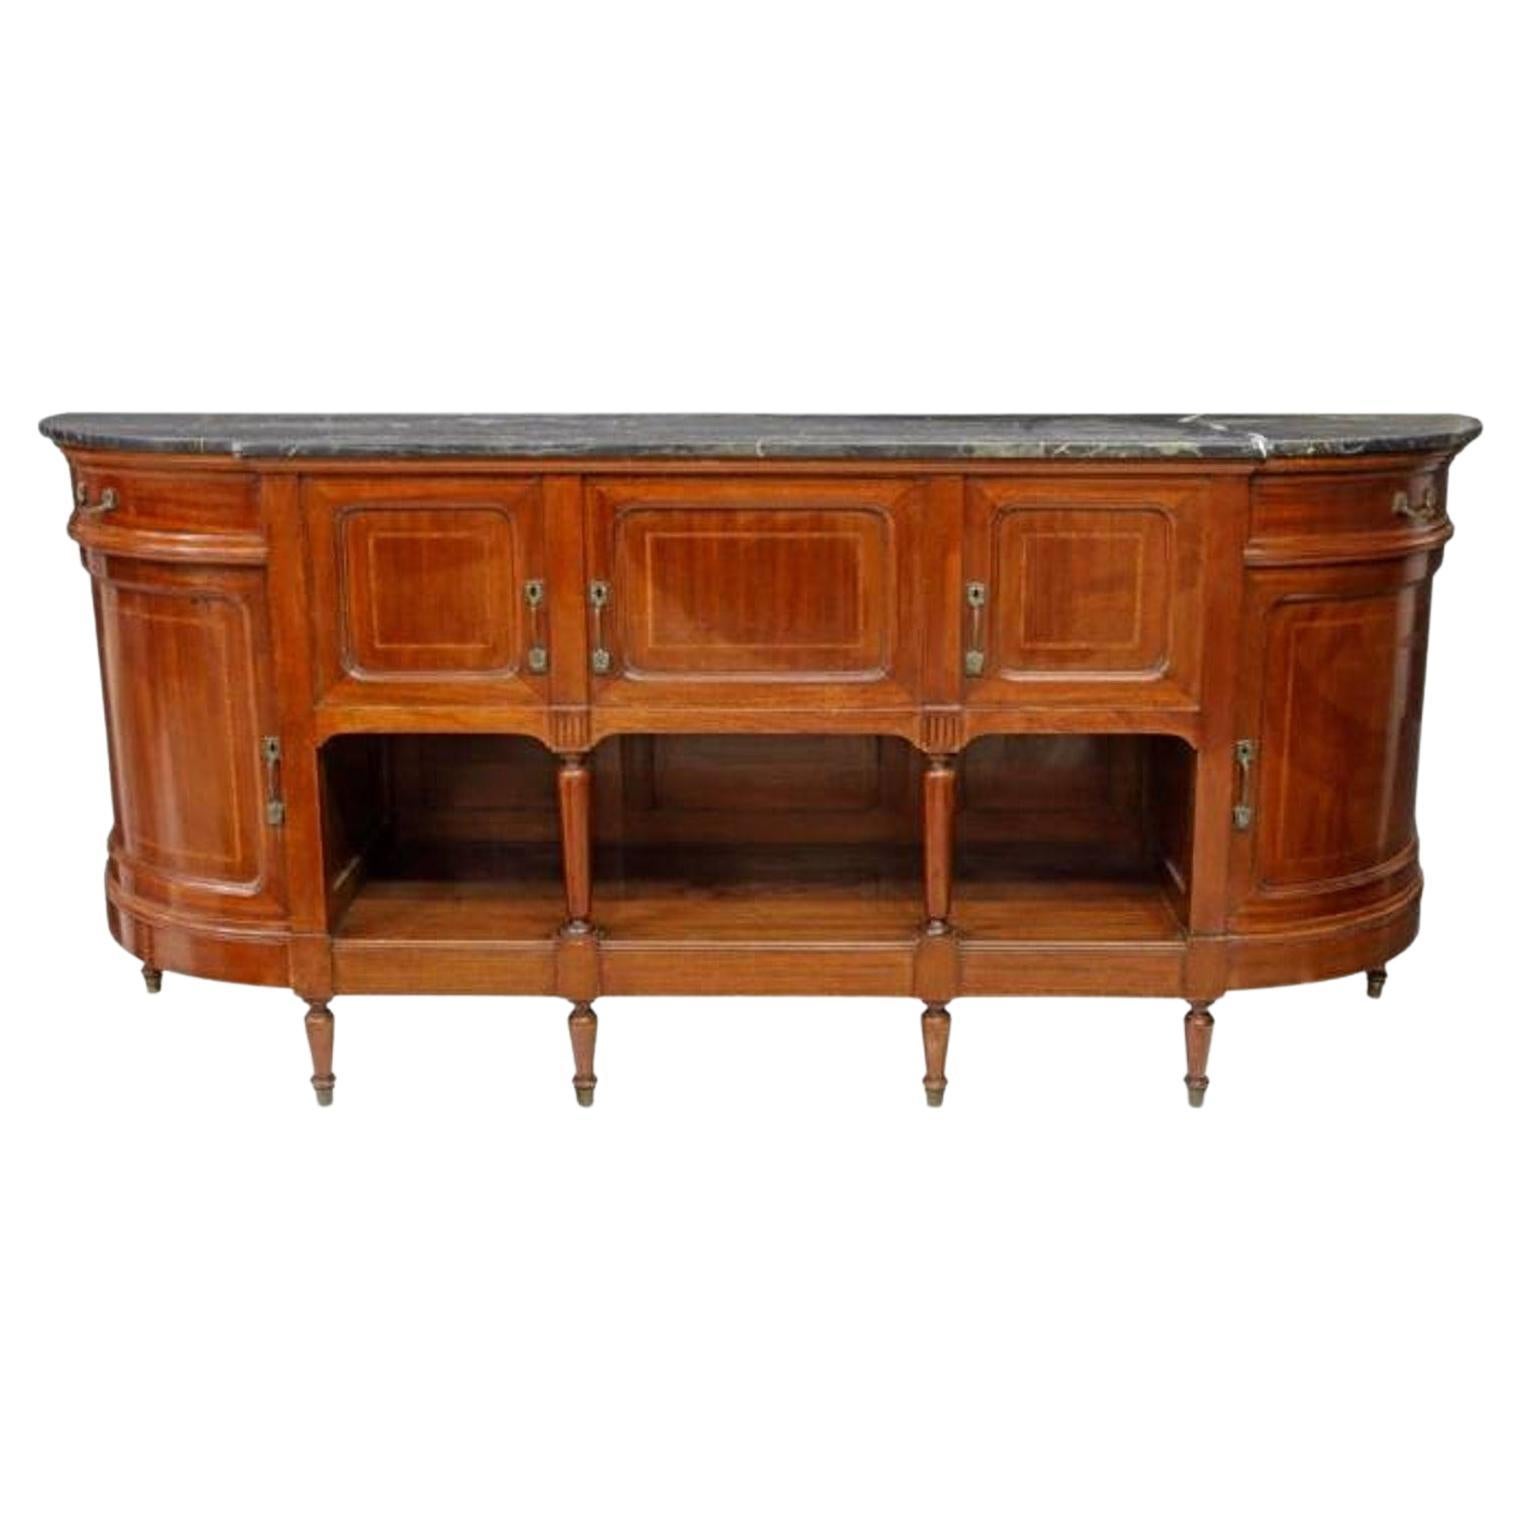 French Belle Epoch Period Louis XVI Style Mahogany Sideboard